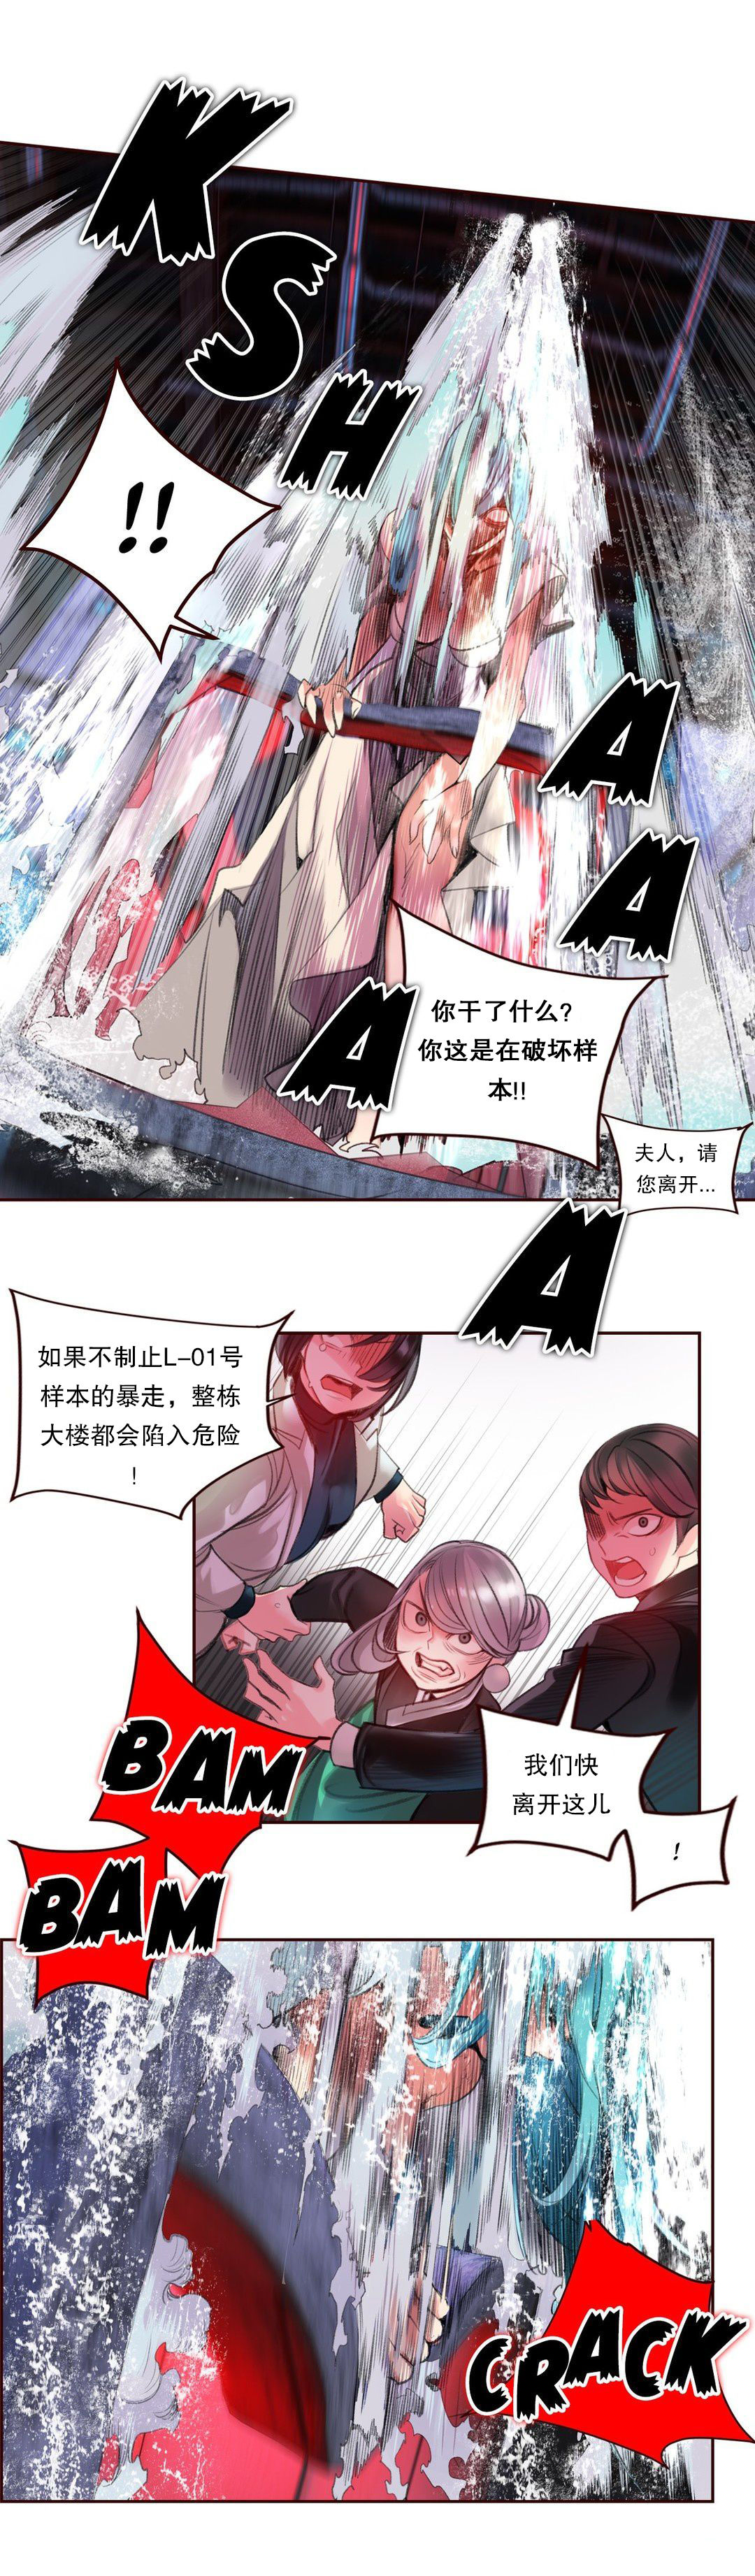 [Juder] Lilith`s Cord (第二季) Ch.61-70 [Chinese] [aaatwist个人汉化] [Ongoing] 